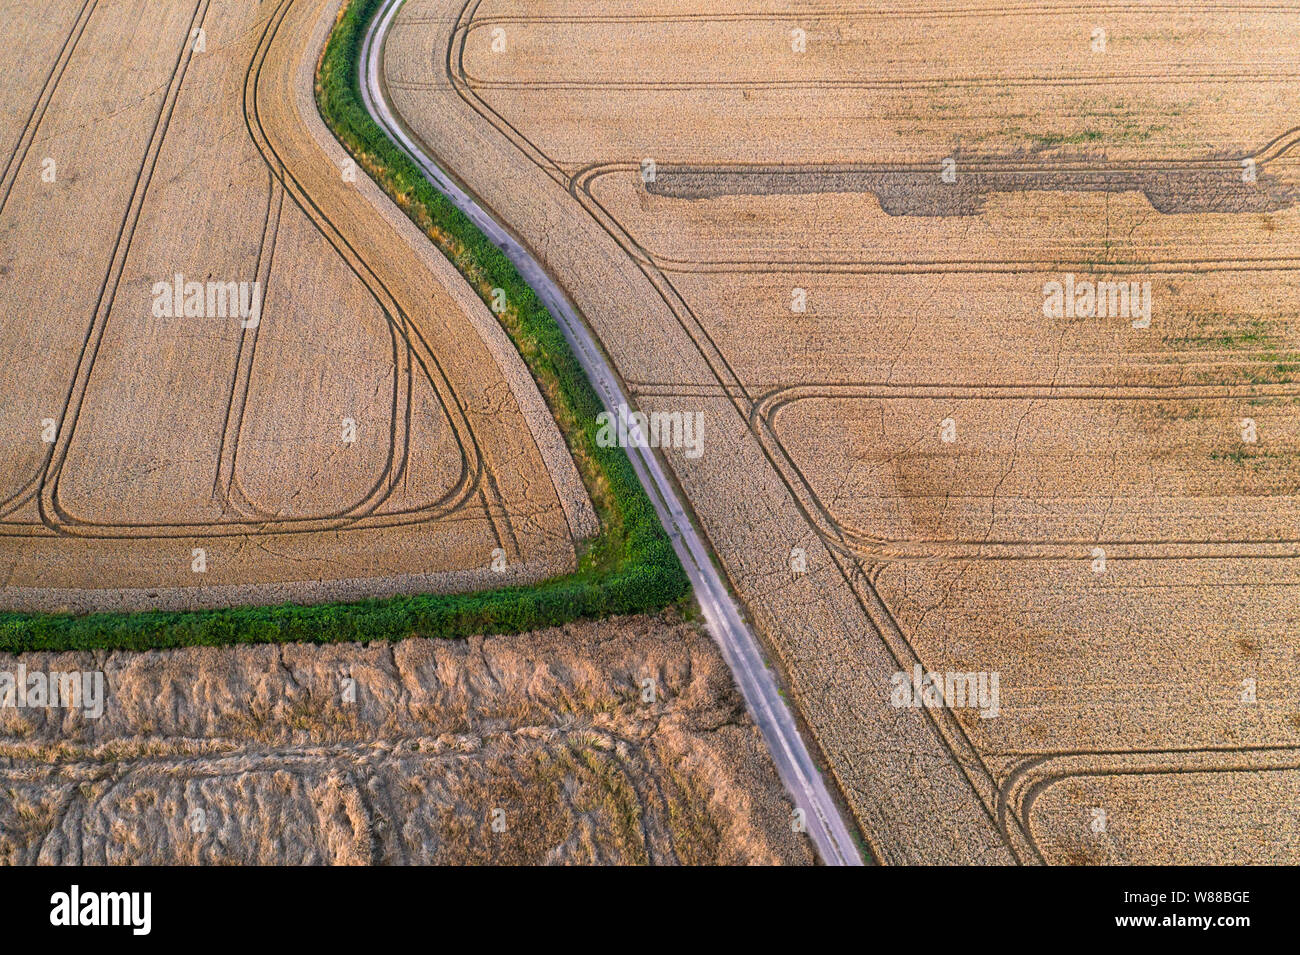 Textures and patterns of ripe golden grain field. Aerial shoot Stock Photo